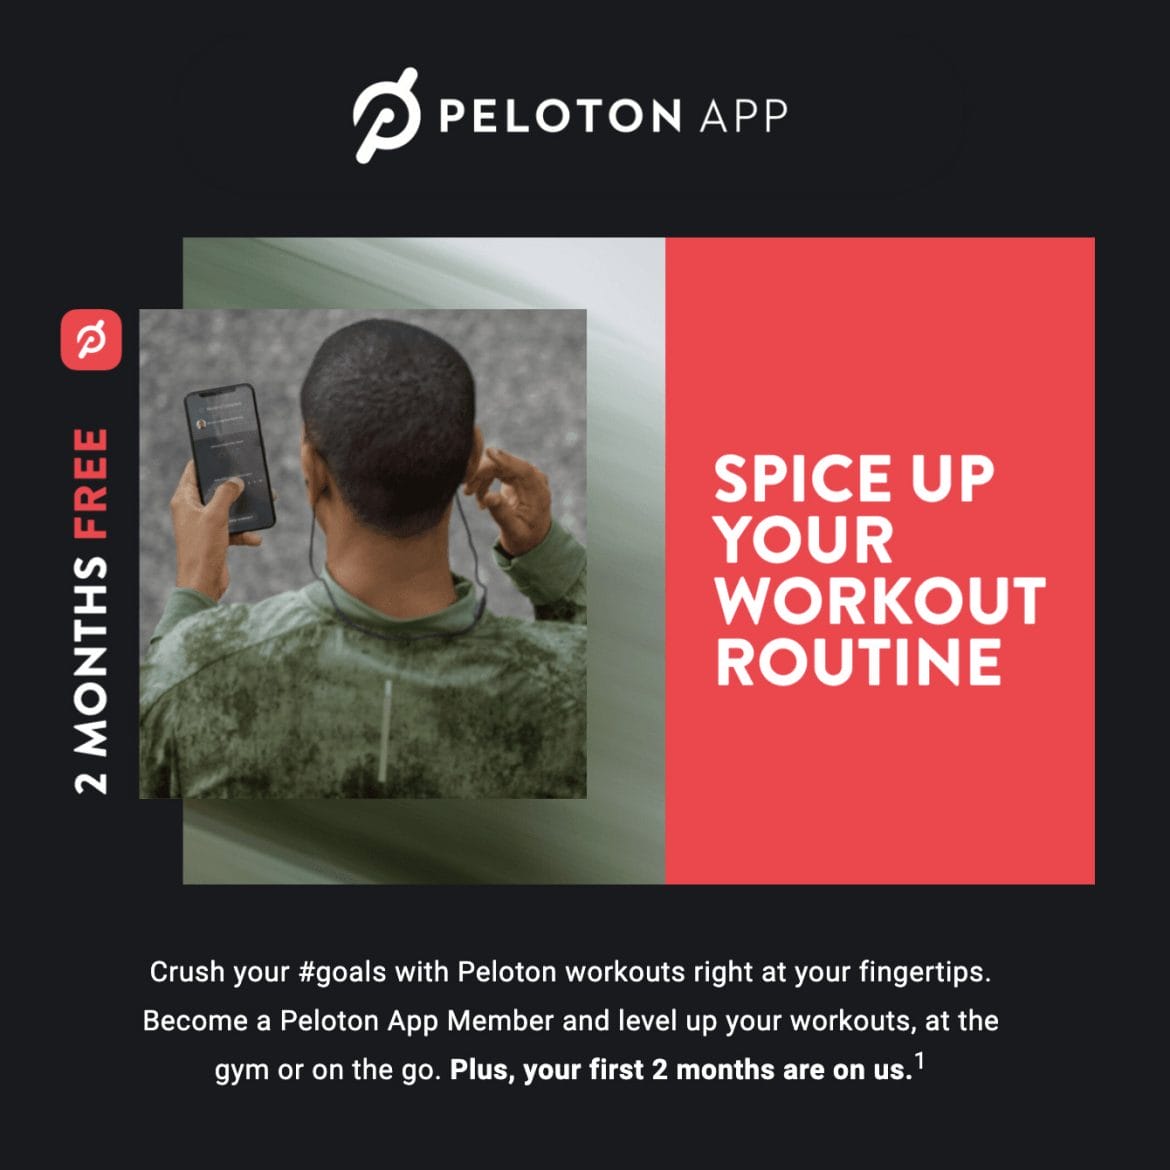 Peloton email advertising special App offer to new members.